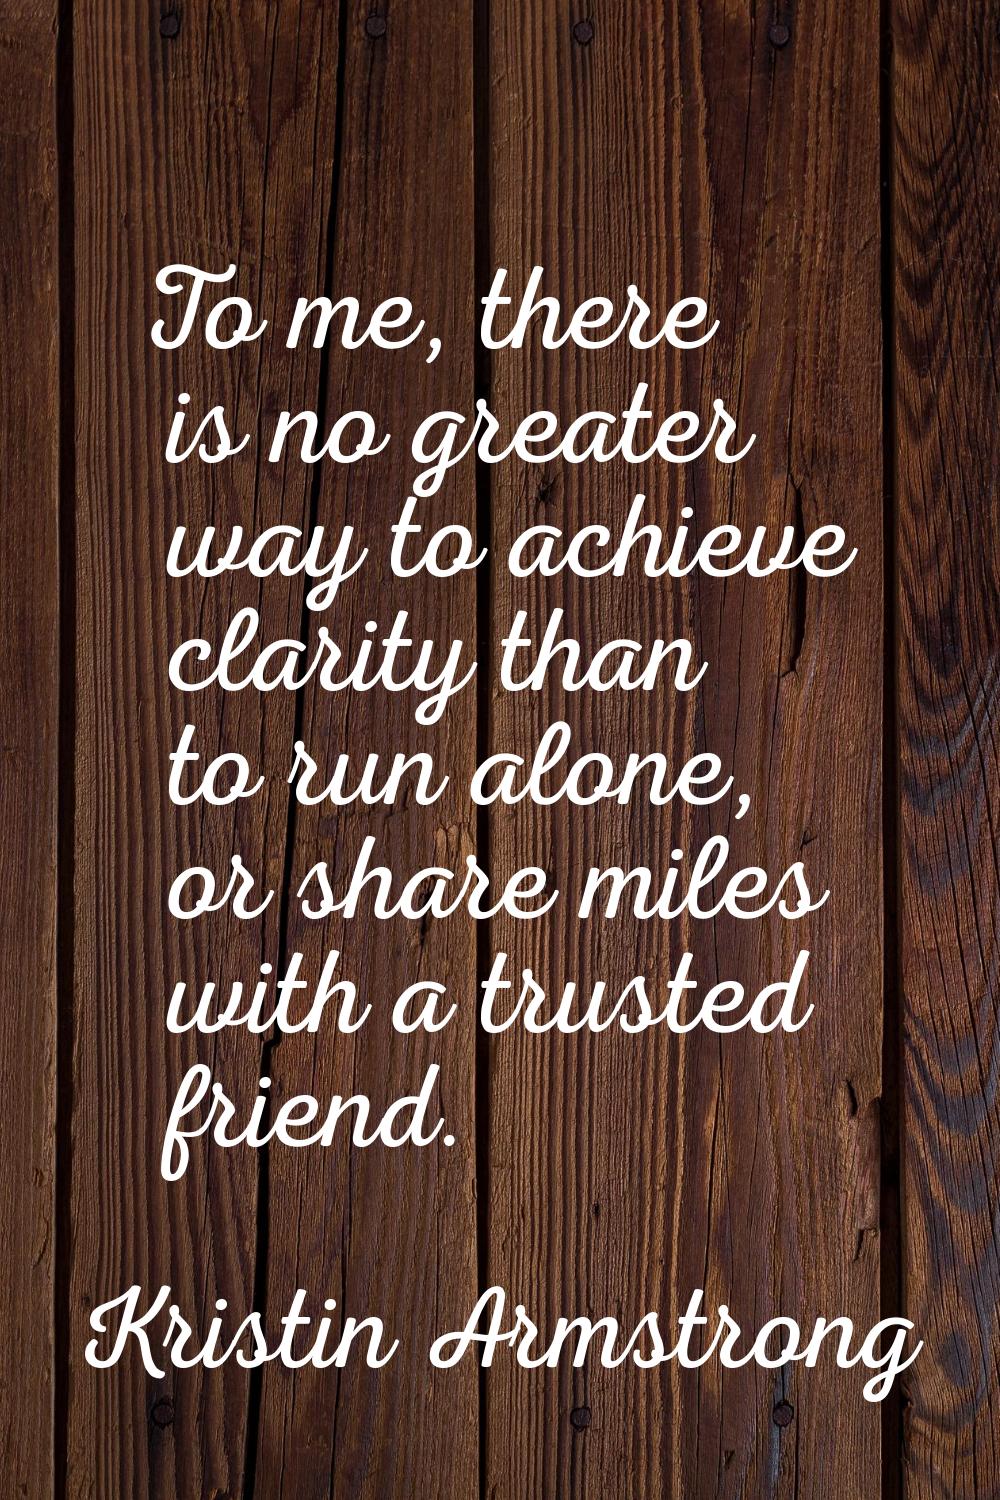 To me, there is no greater way to achieve clarity than to run alone, or share miles with a trusted 